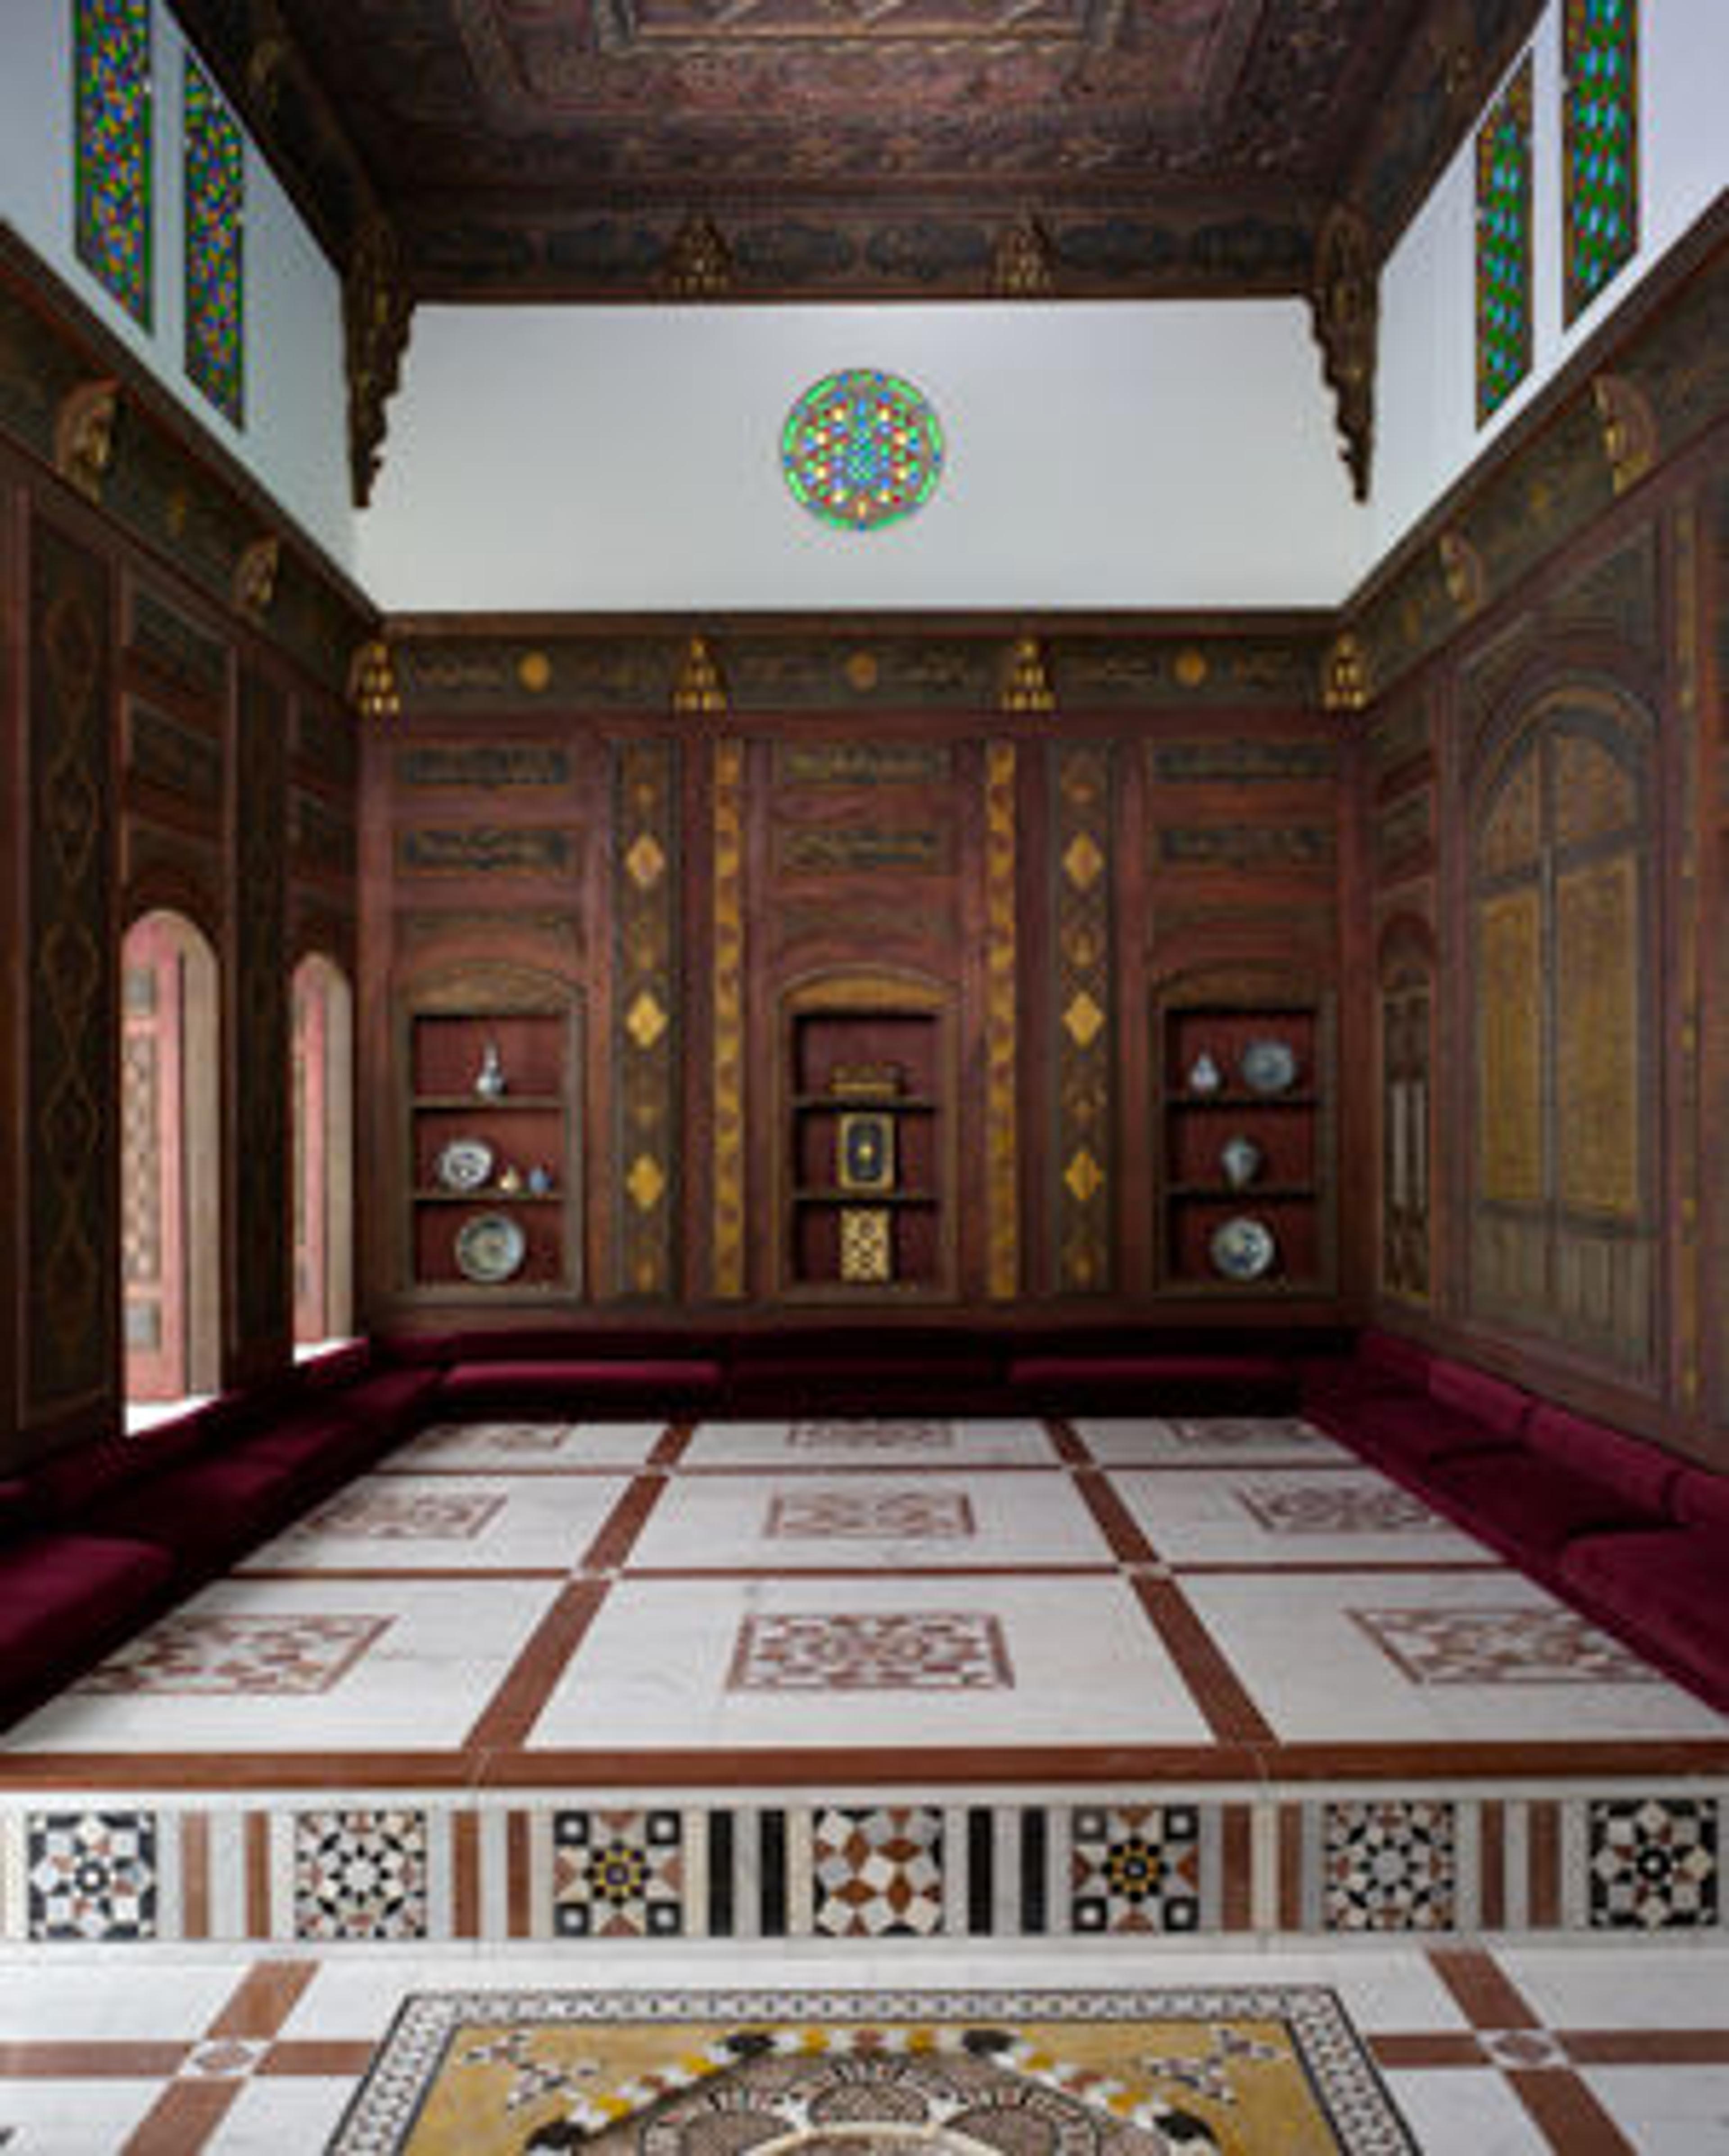 Damascus Room, dated A.H. 1119/A.D. 1707 | Syria, Damascus. Islamic | 1970.170